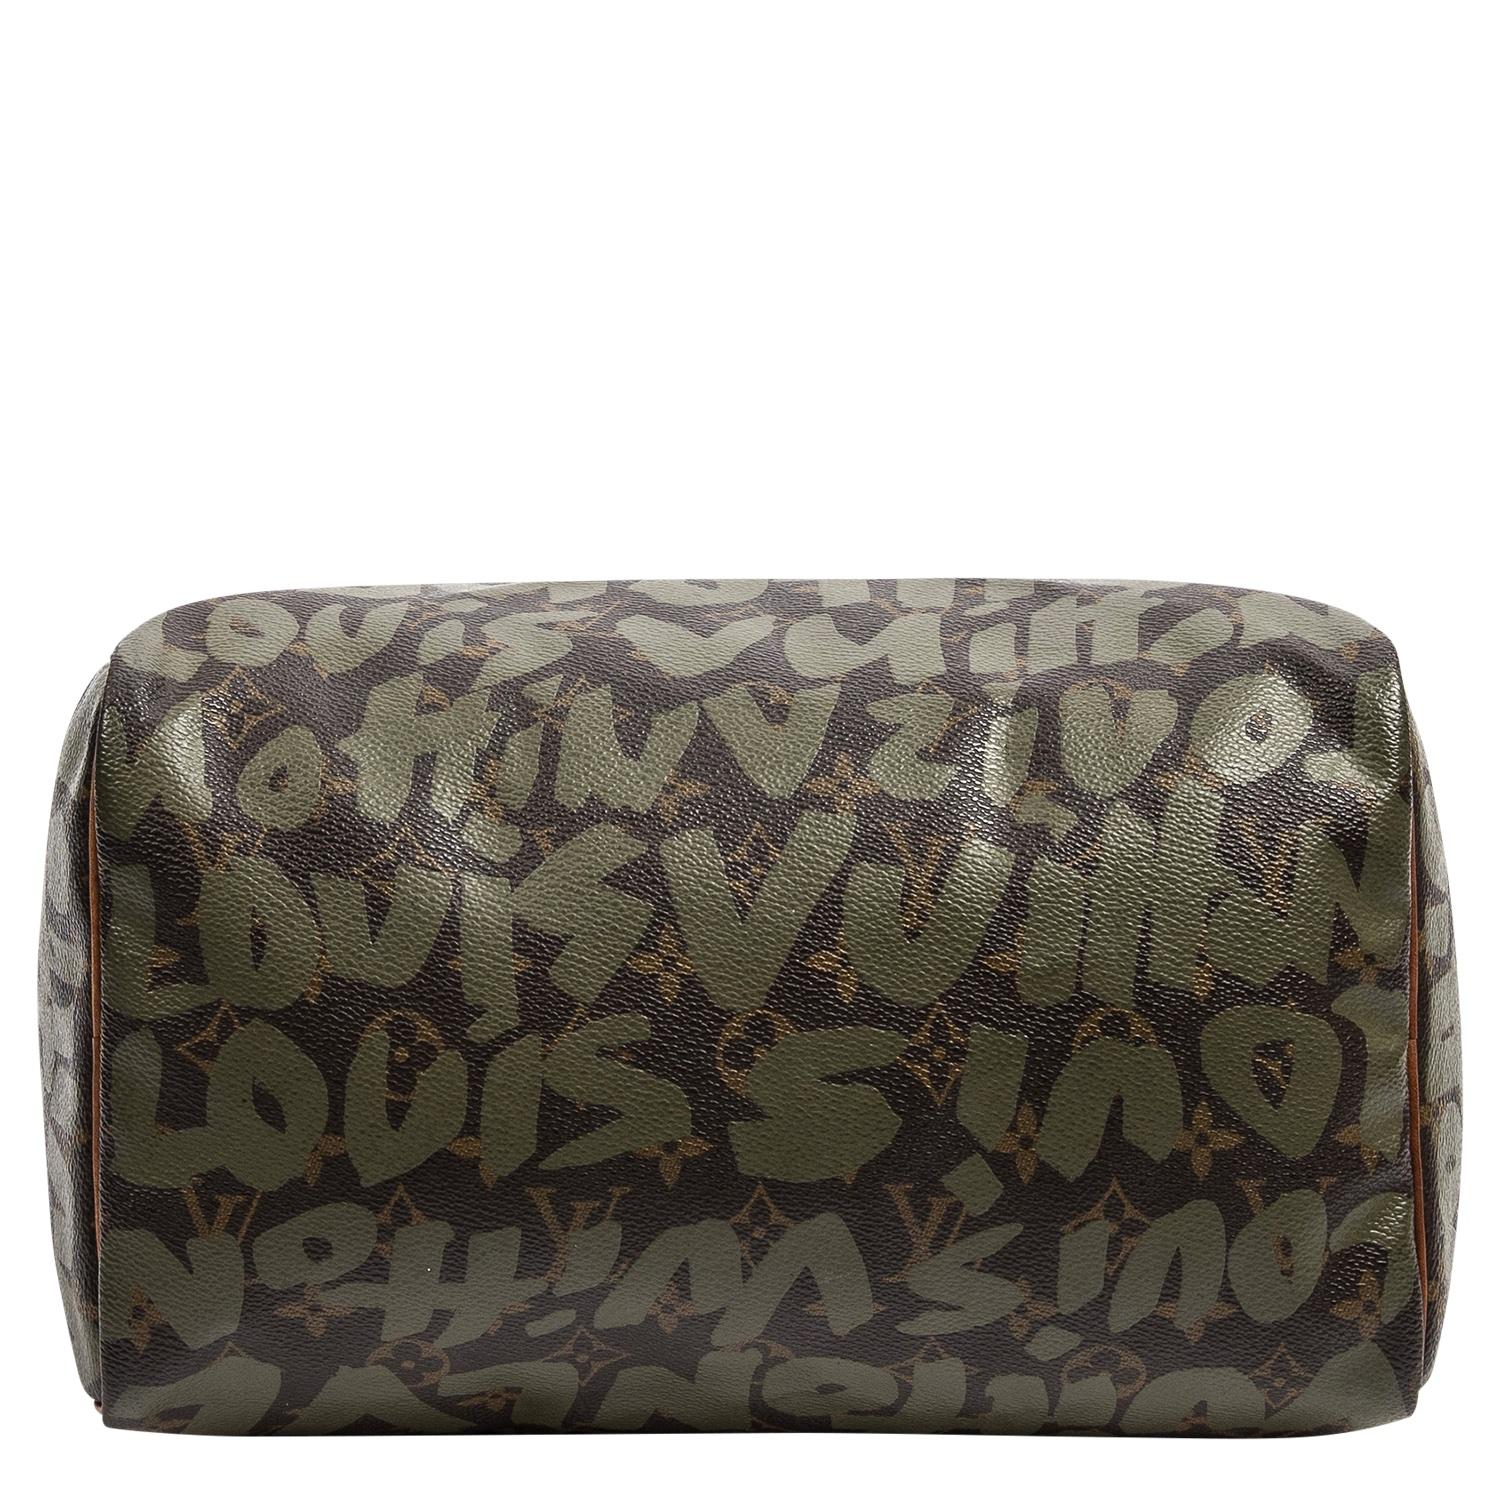 Black Louis Vuitton x Stephen Sprouse Limited Edition Graffiti Speedy 30 For Sale